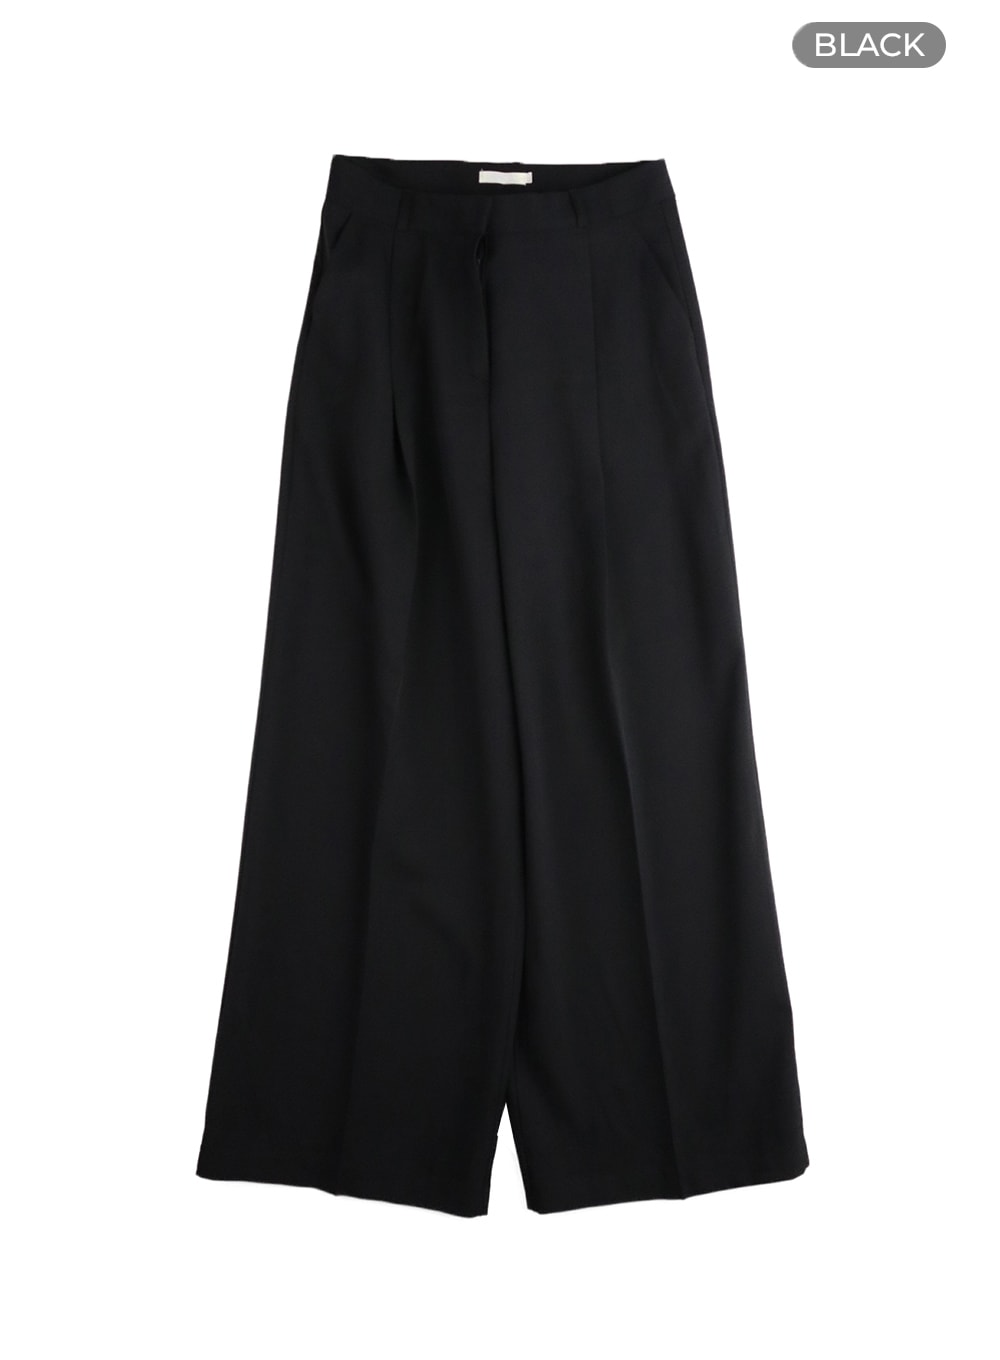 simple-wide-trousers-im414